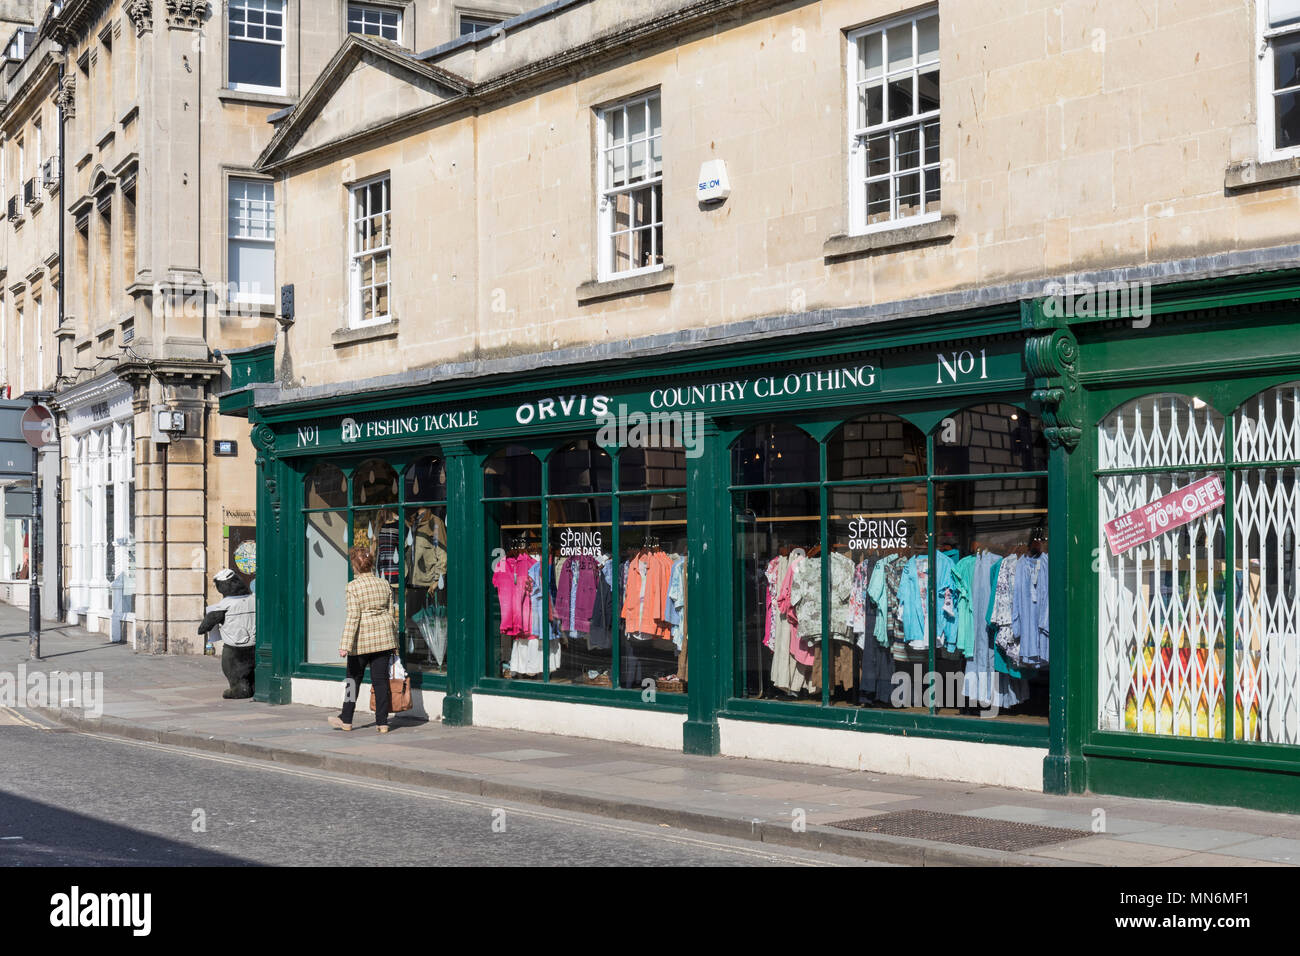 Orvis store in Bath, Somerset, England Stock Photo